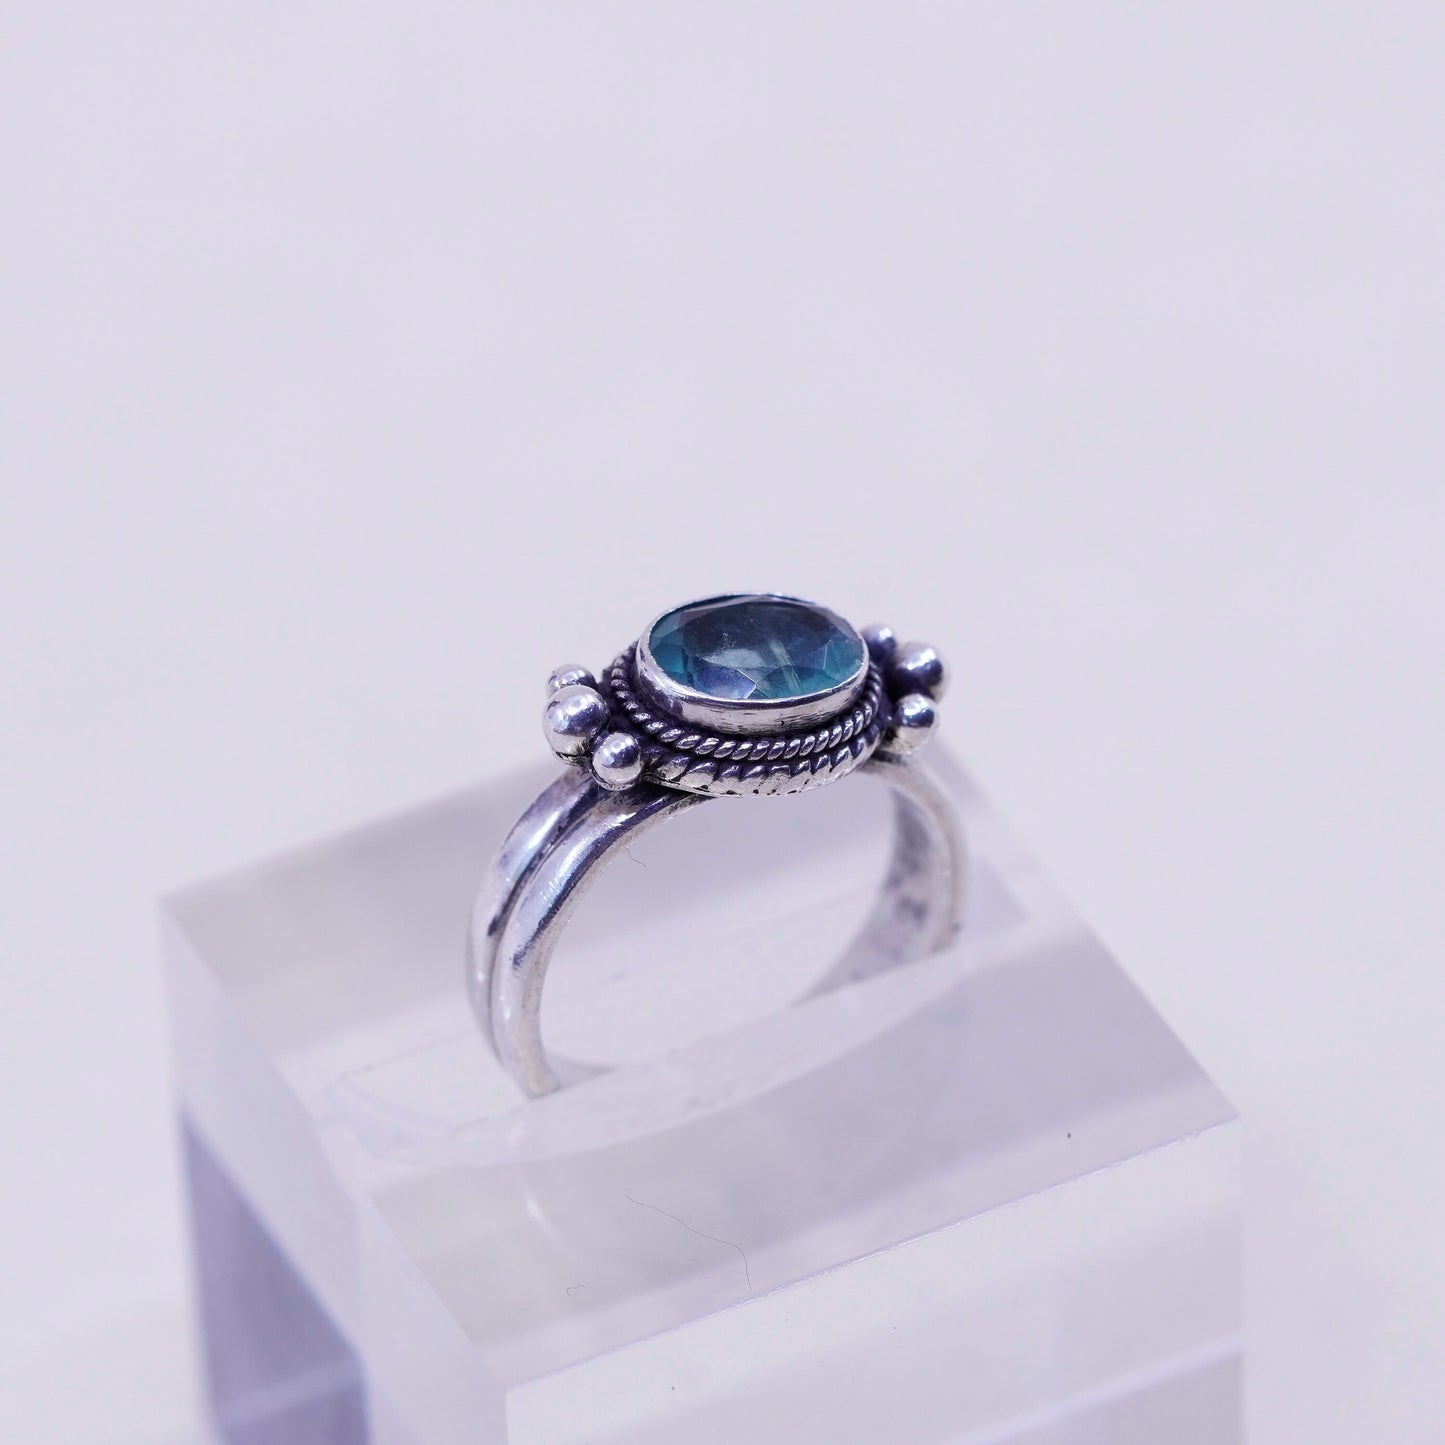 Size 5.75, vintage Sterling silver statement ring, 925 band with blue topaz